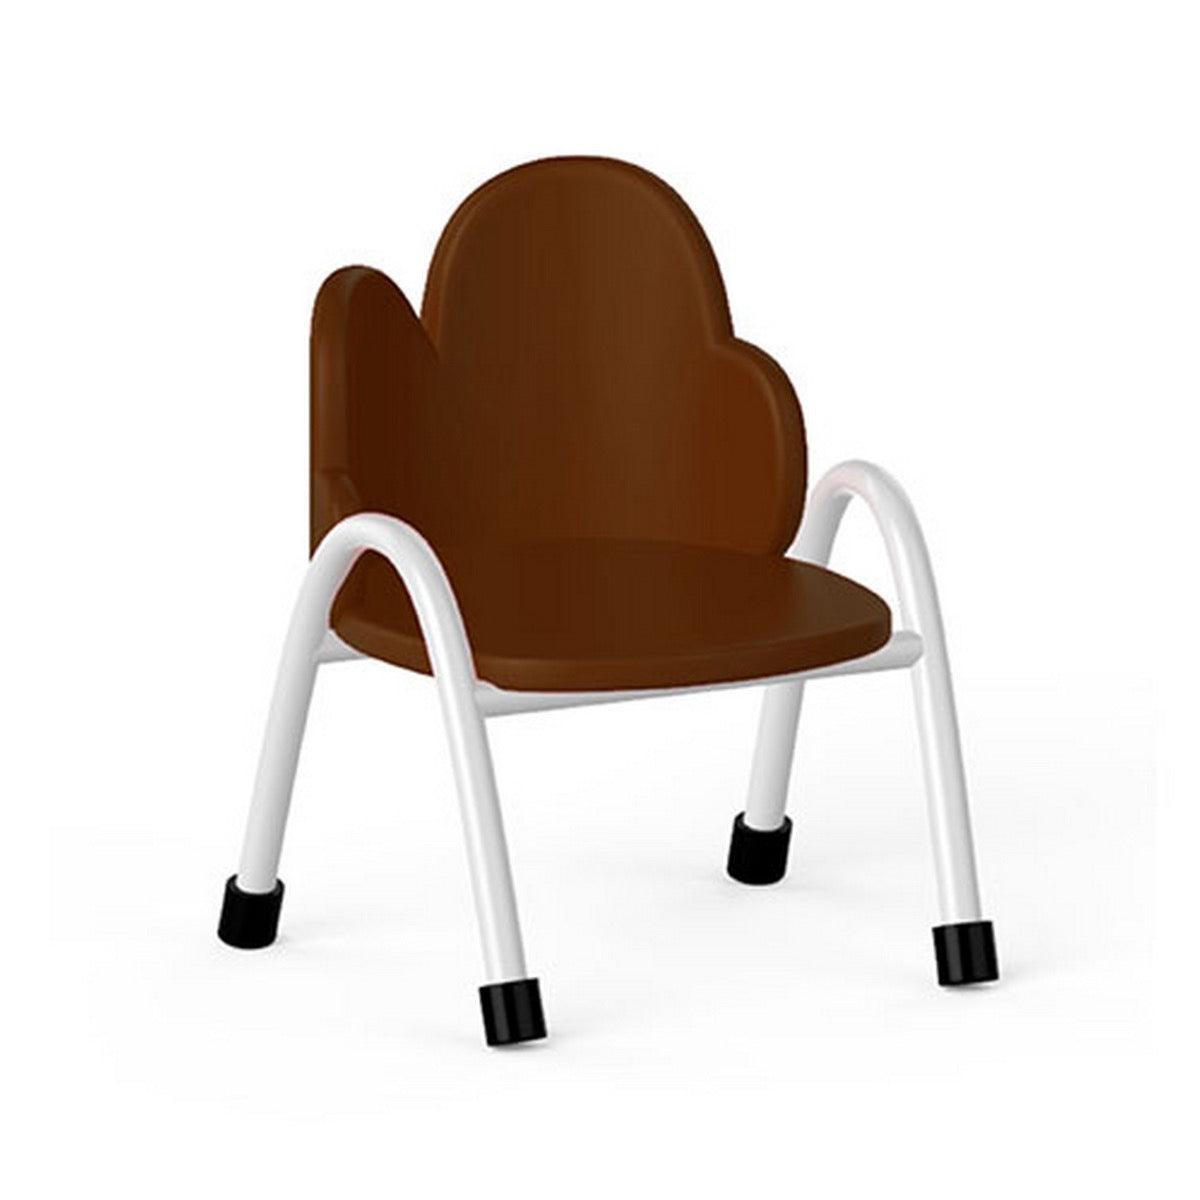 Ok Play Cloud Chair, Study Chair, Sturdy And Durable Chair, Plastic Chair, Perfect For Home, Creches And School, Brown, 5 to 10 Years, Height 14 Inches